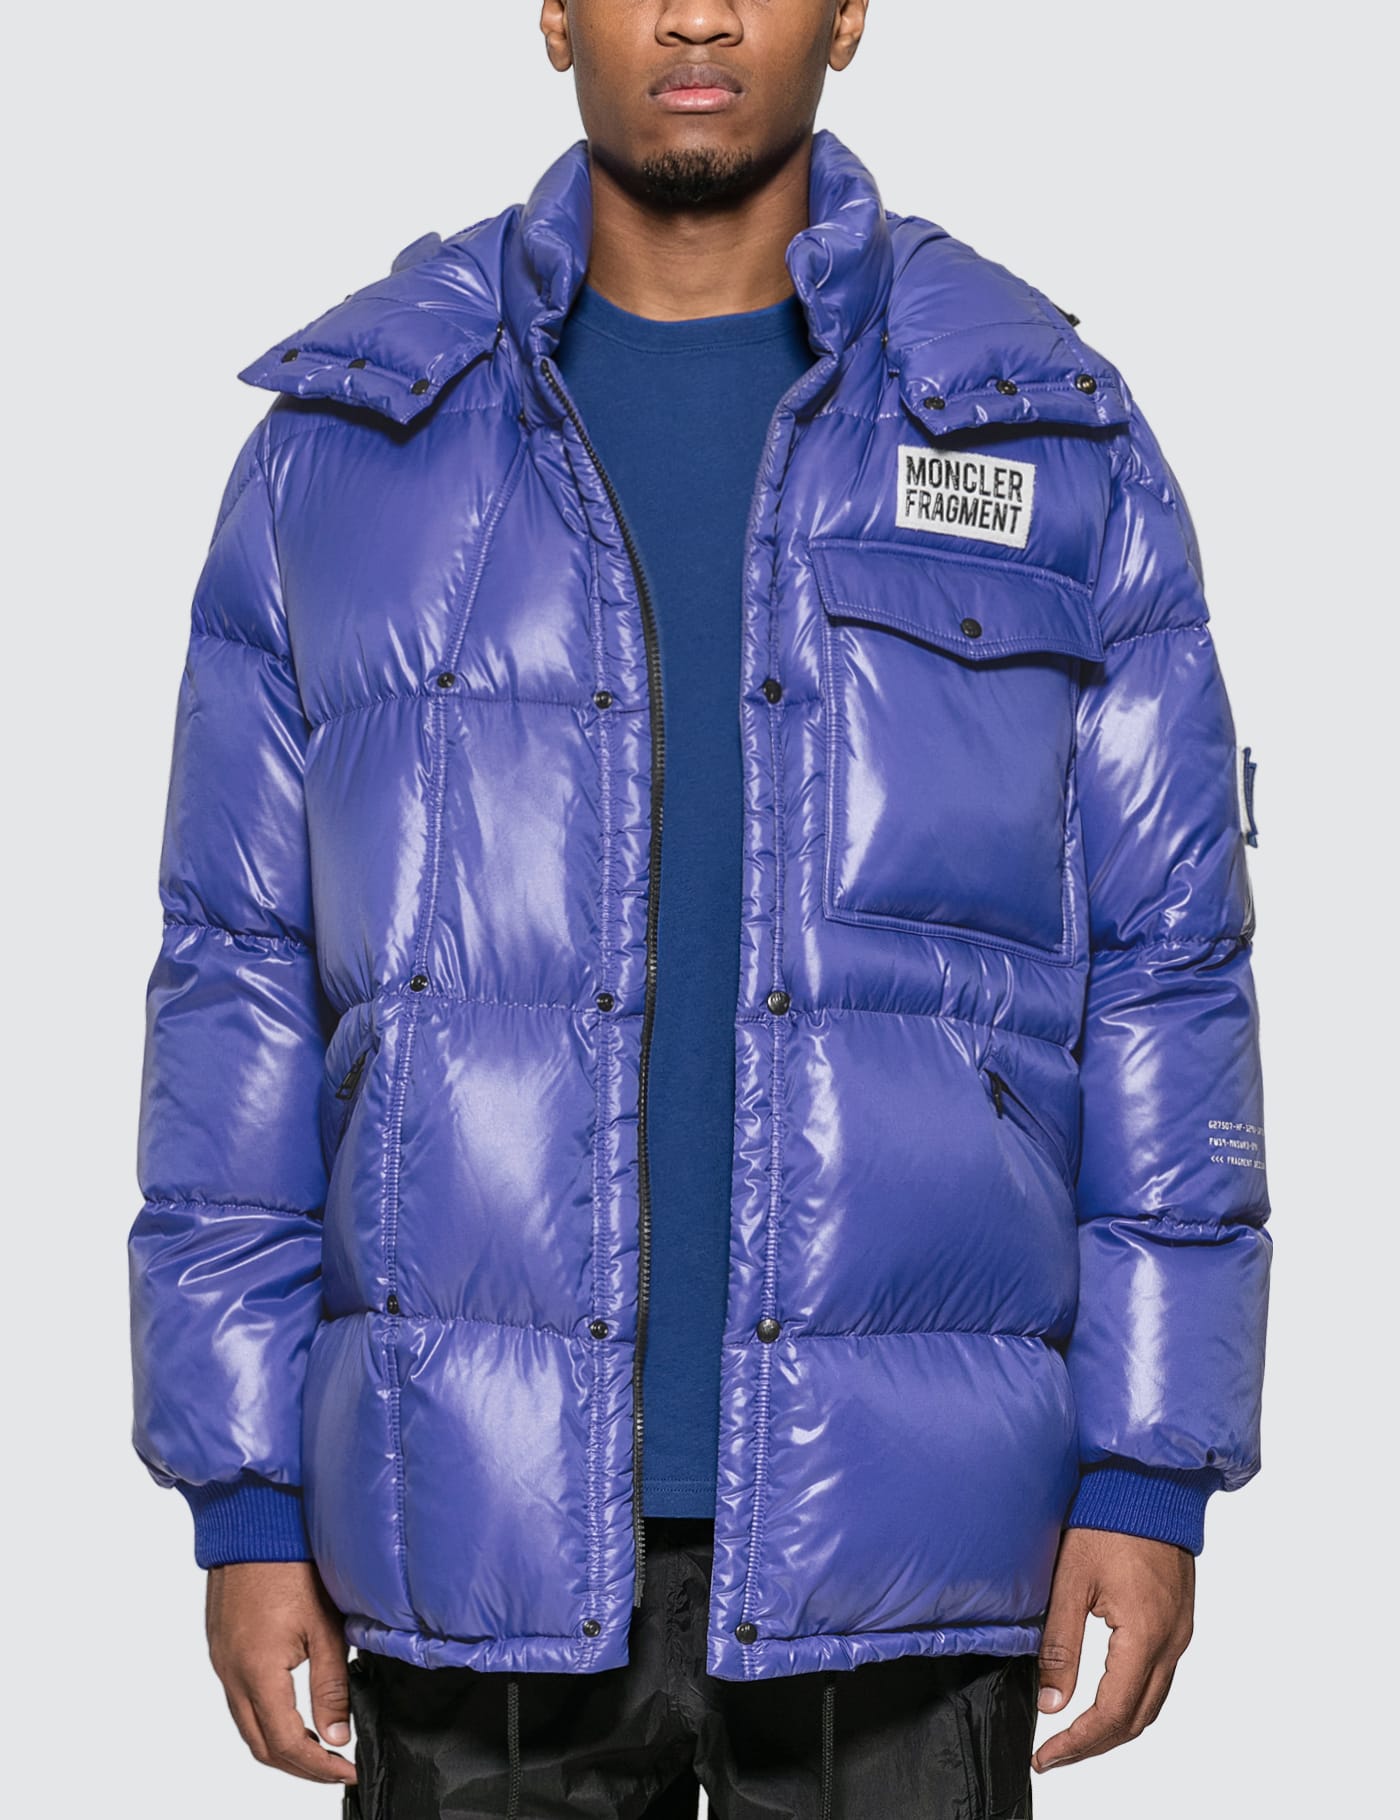 Moncler Fragment Jacket Flash Sales, 48% OFF | www.ilpungolo.org